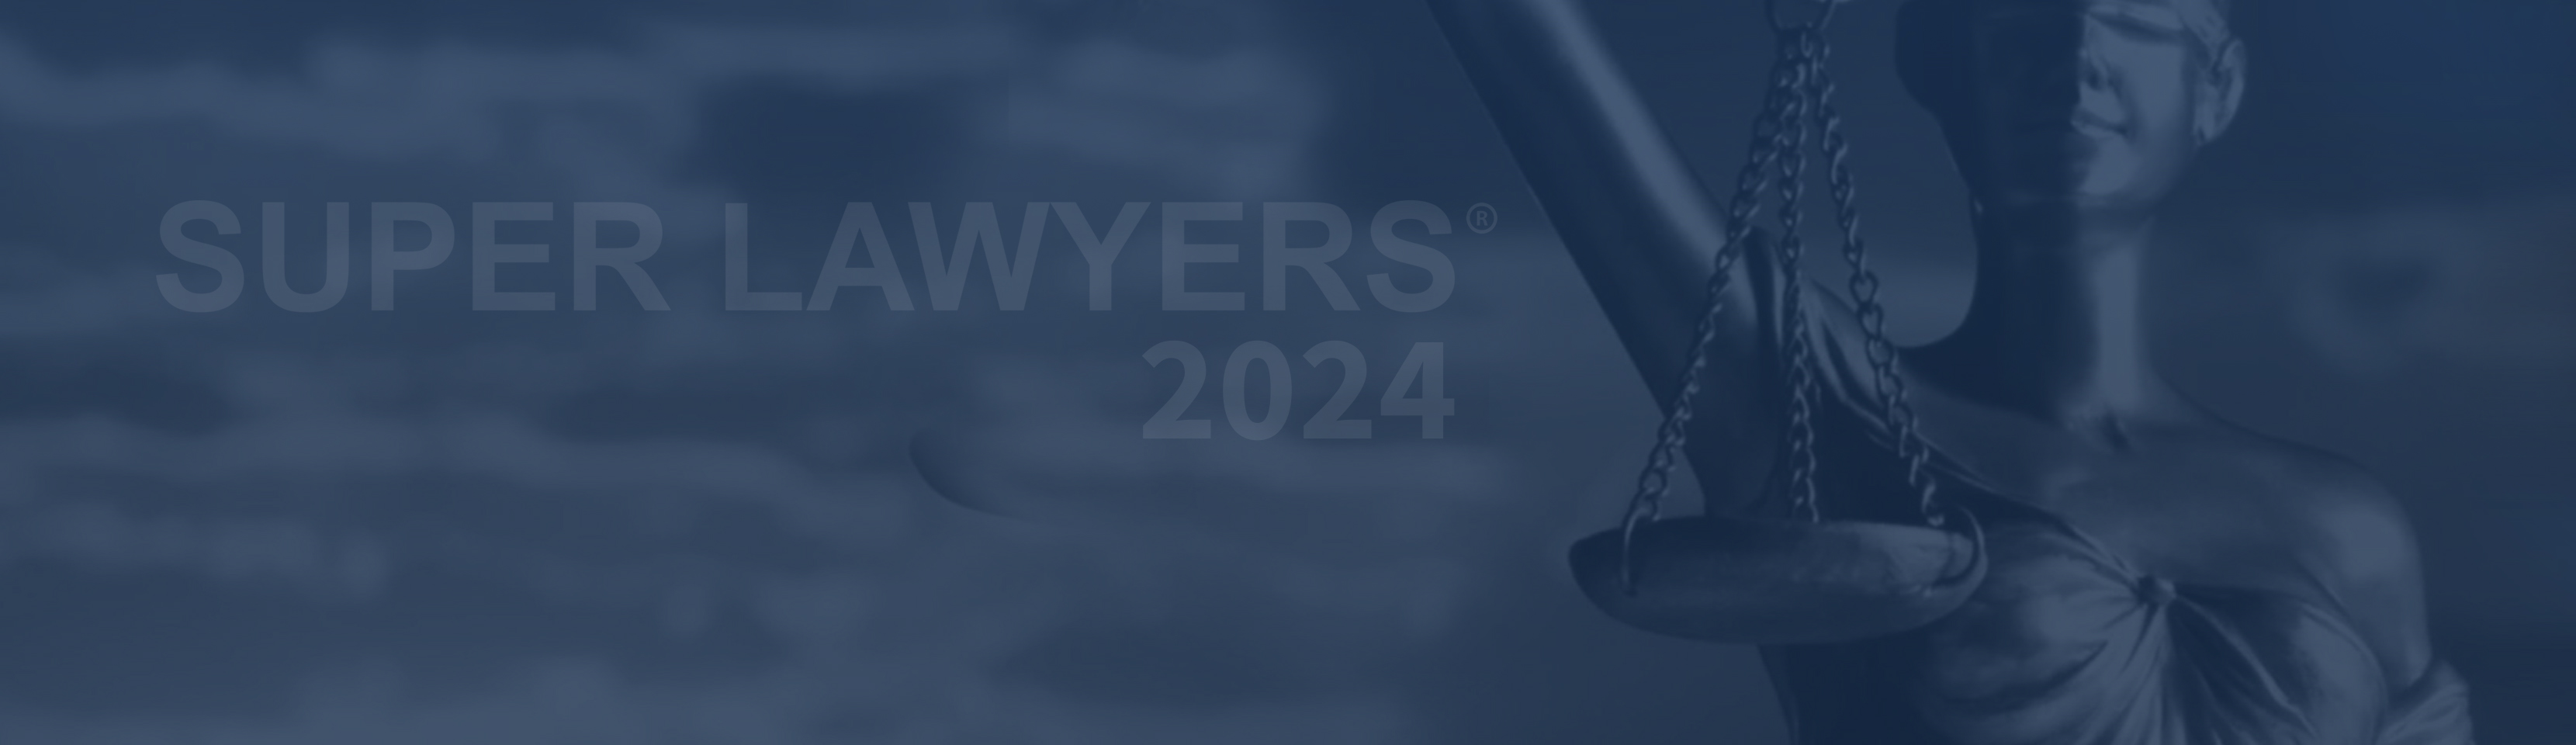 27 Goodell DeVries Attorneys Honored in Super Lawyers 2024